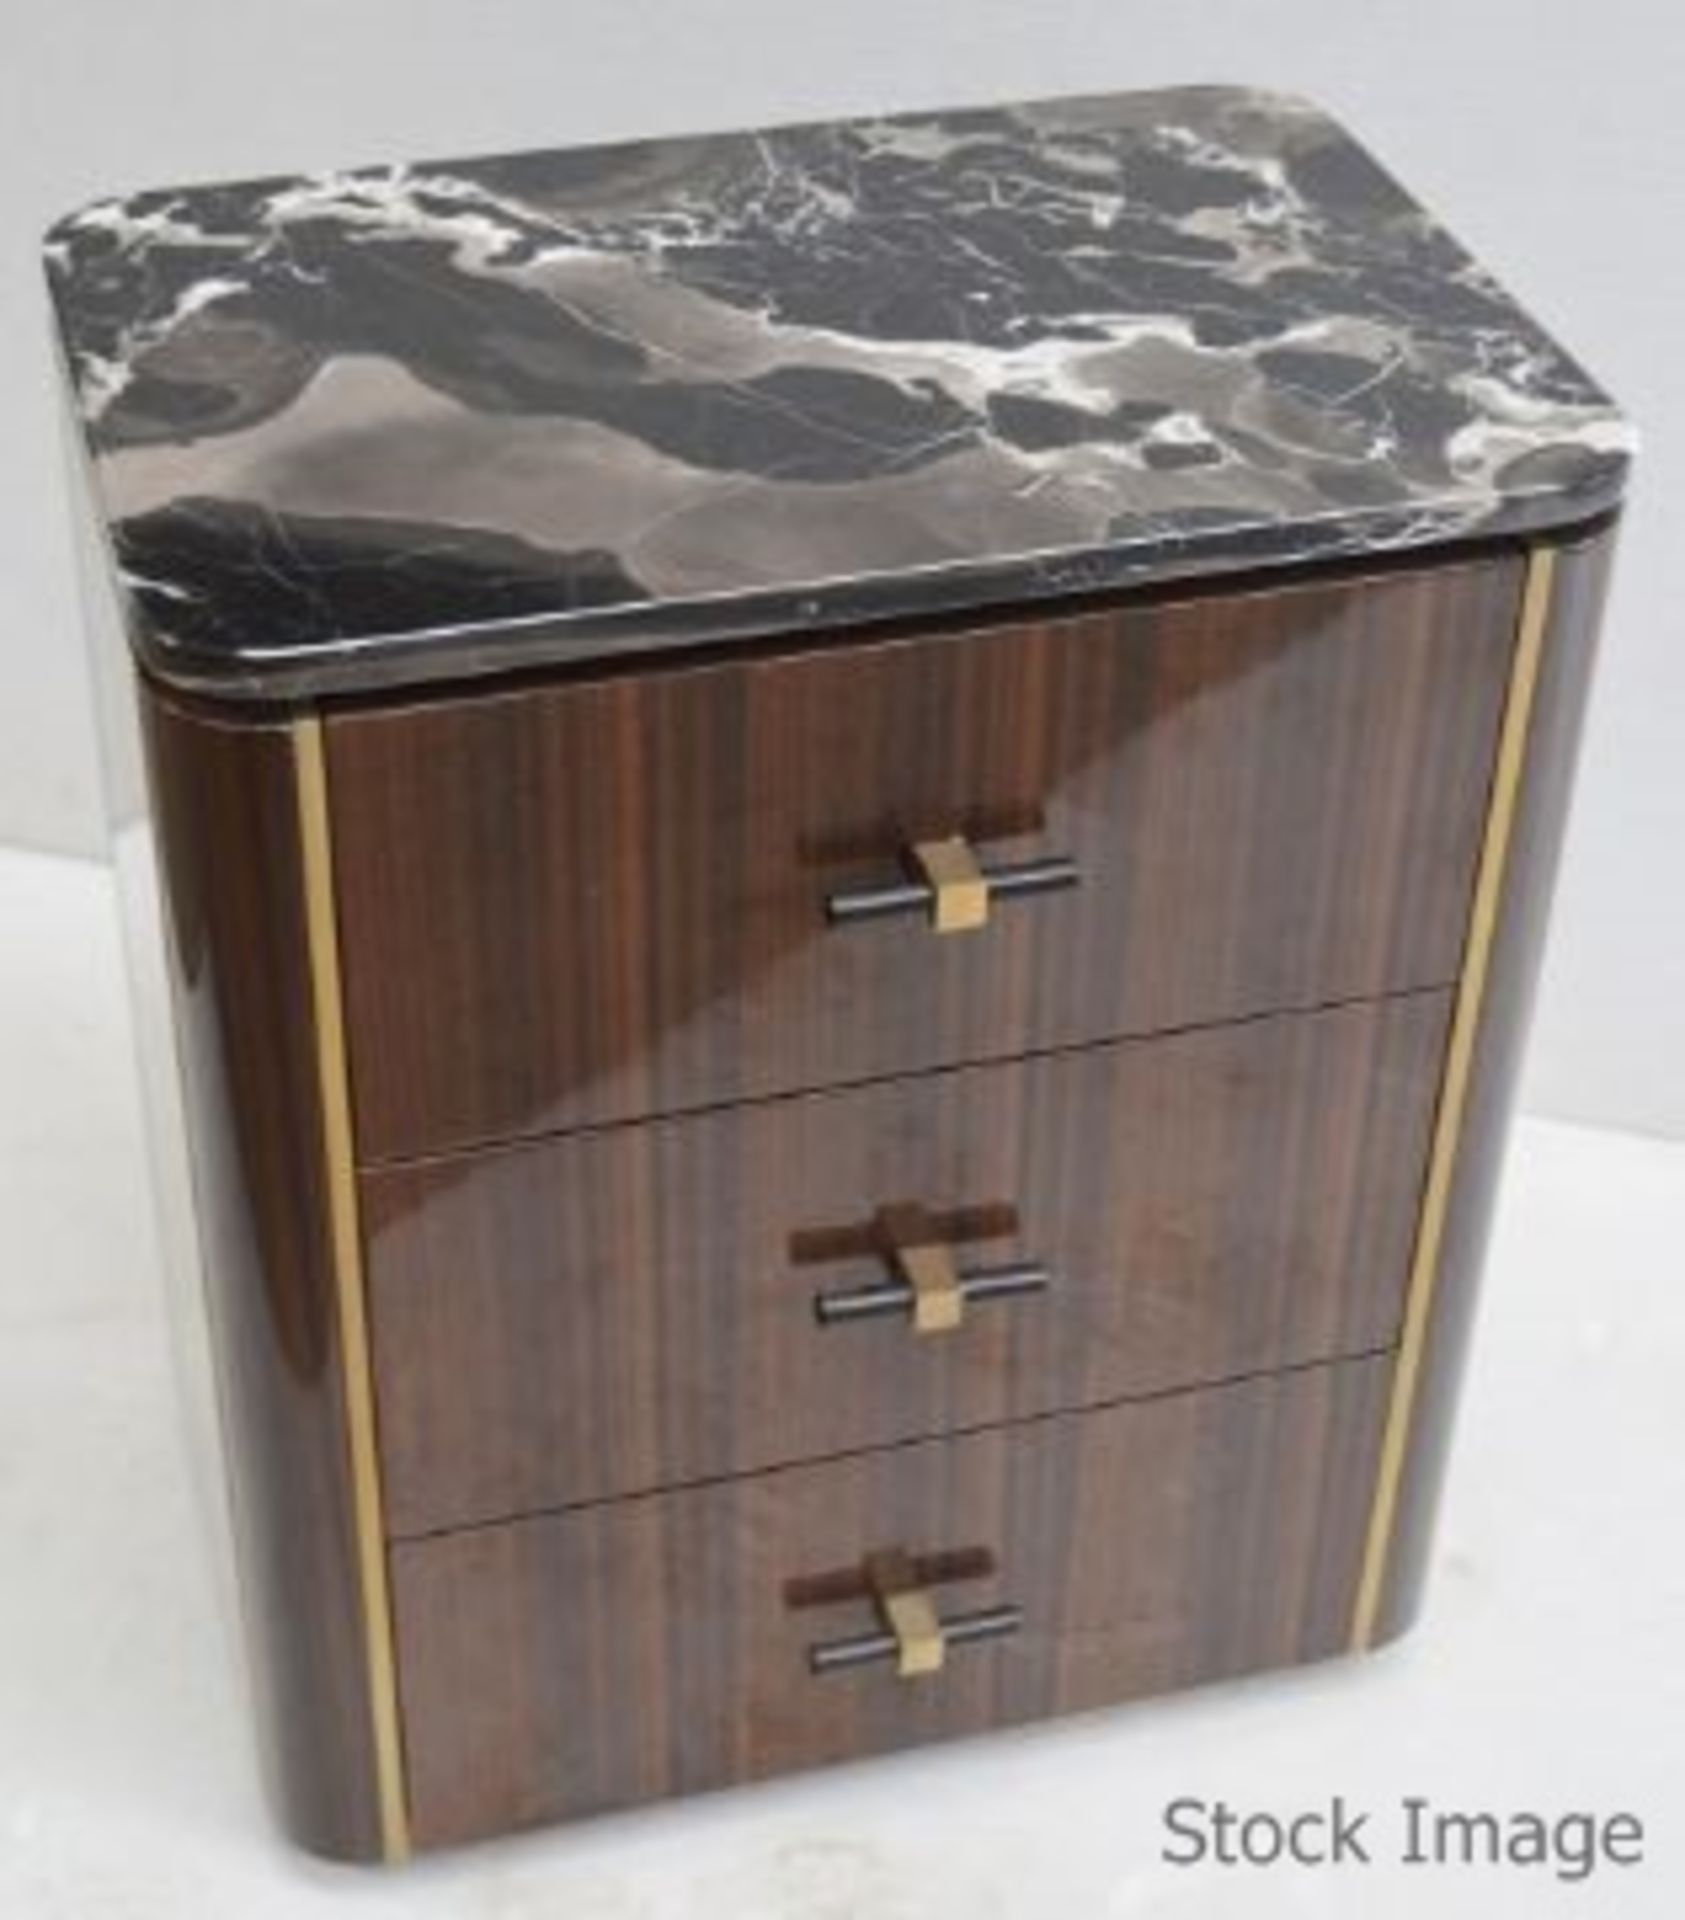 1 x FRATO 'BERNA' Luxury Designer Stone-topped Bedside Table With 3 Soft-close Lined Drawers